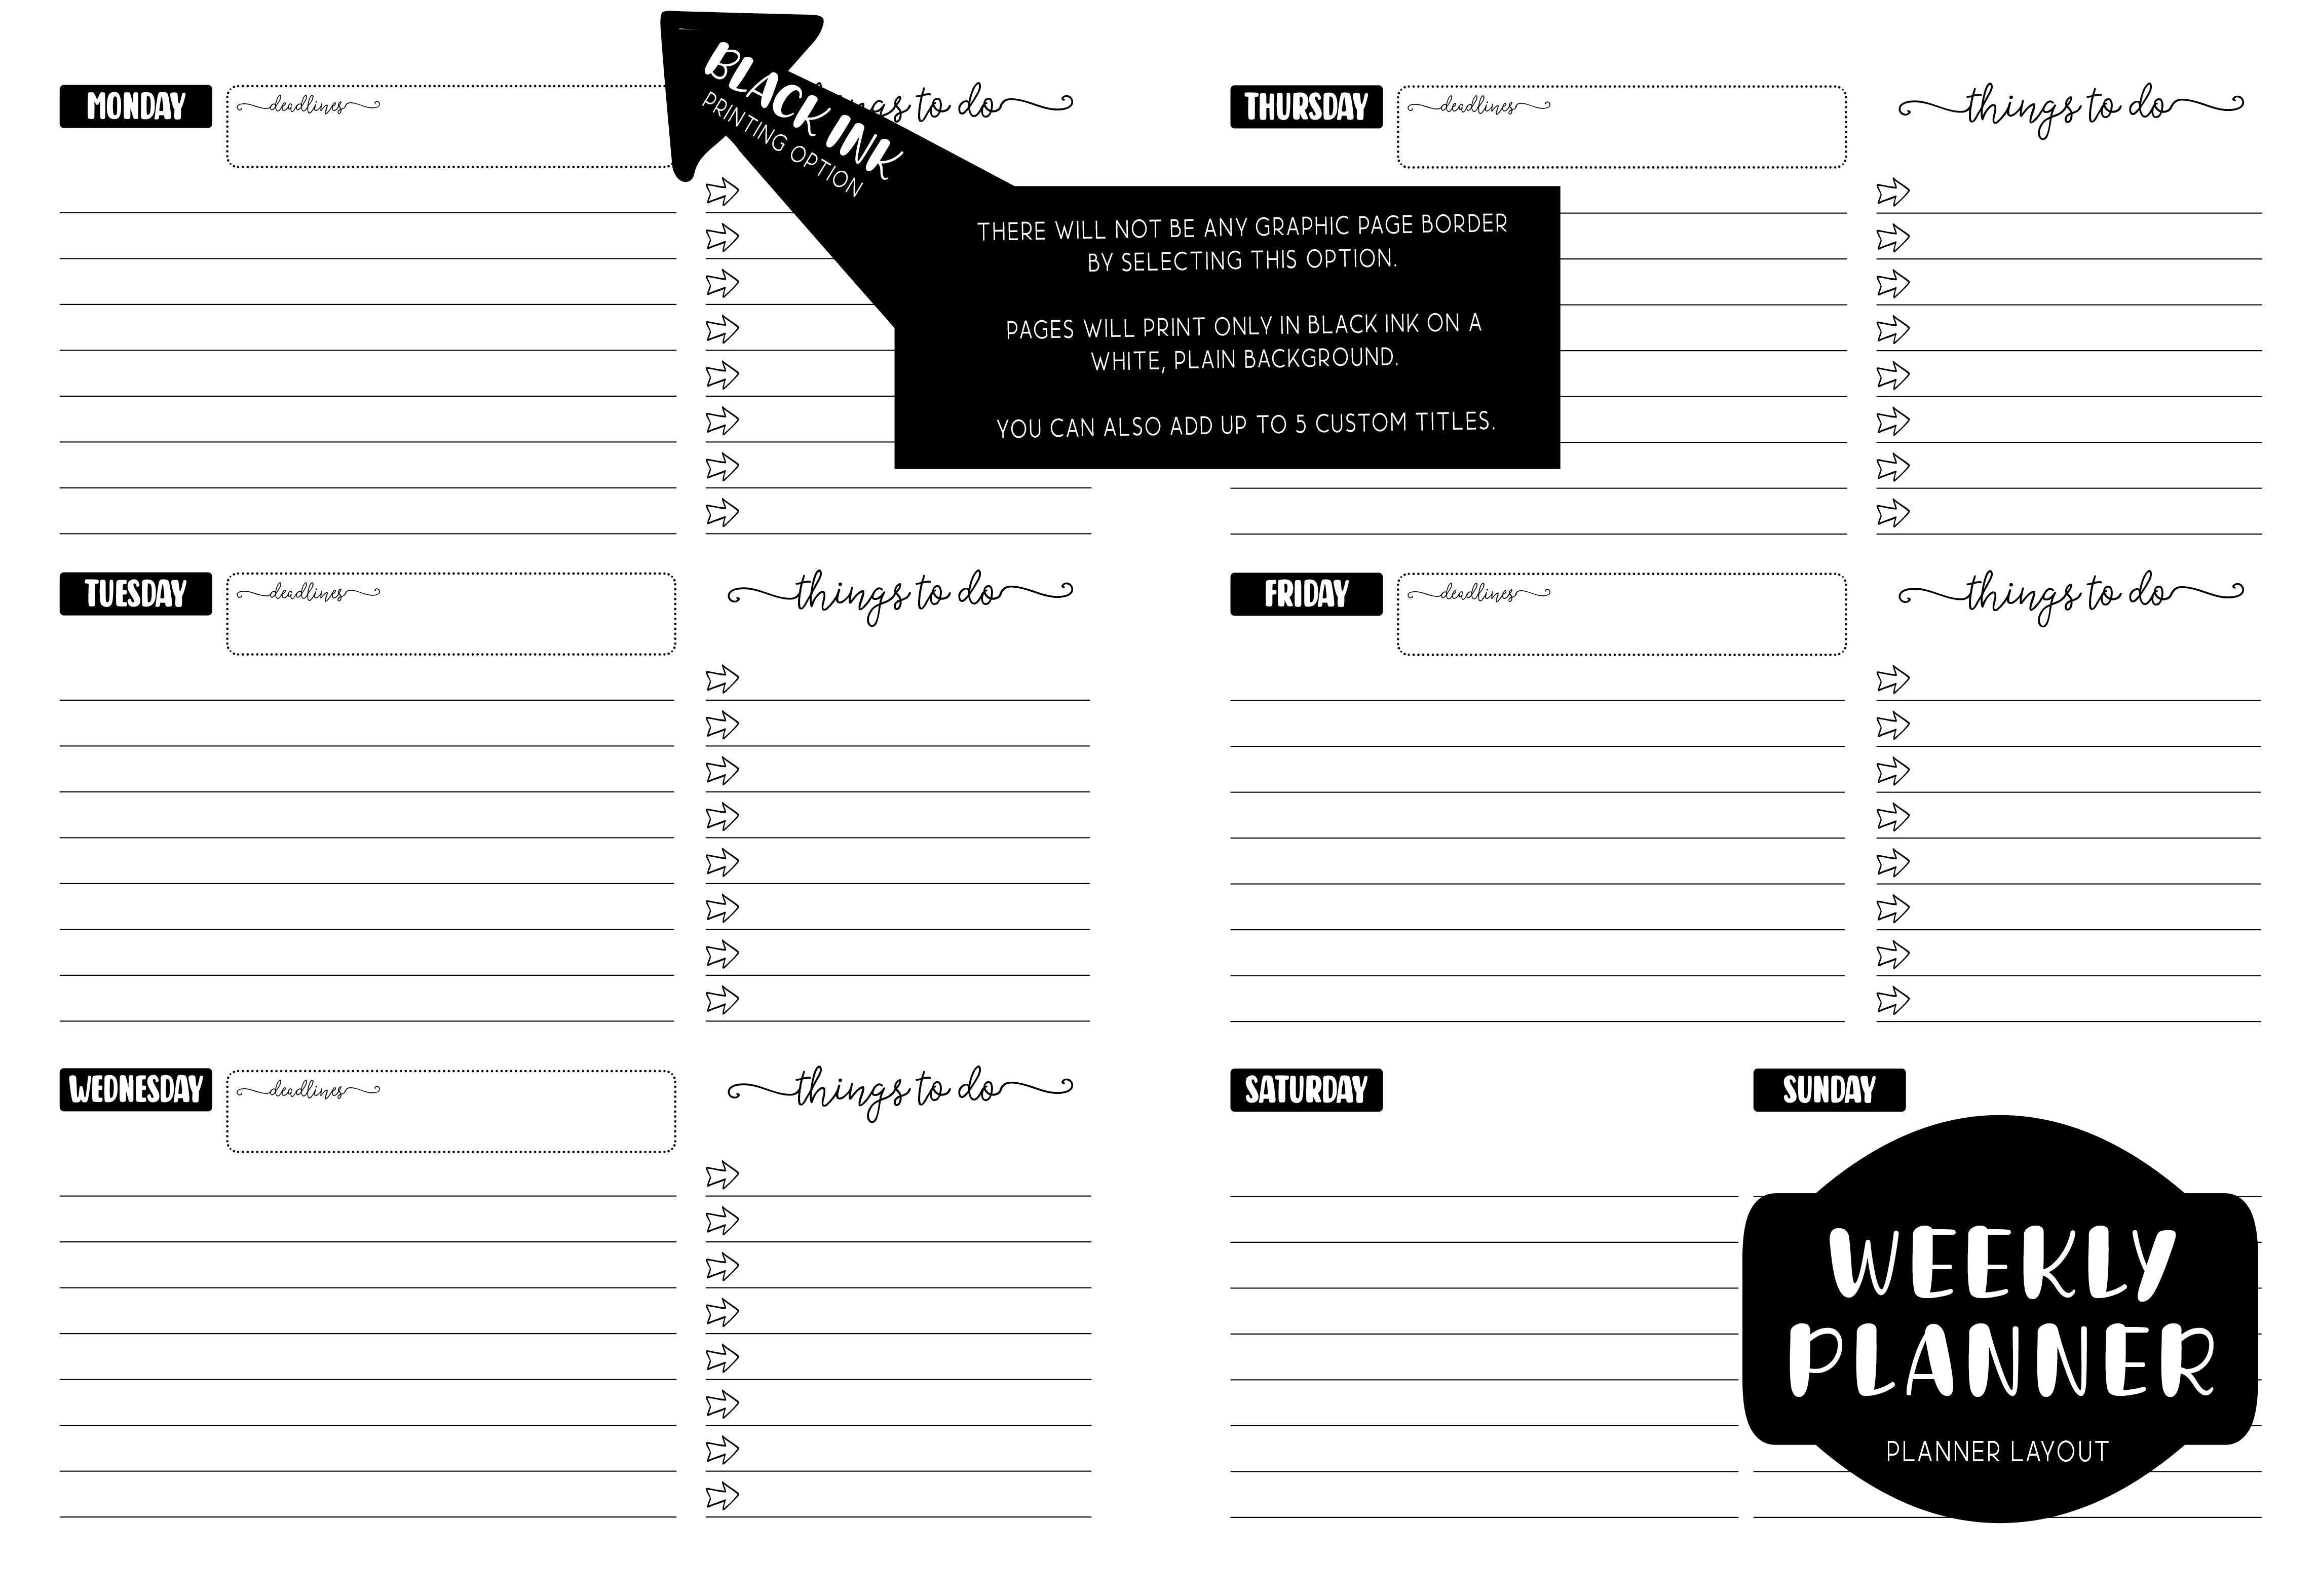 Weekly Planner - USE